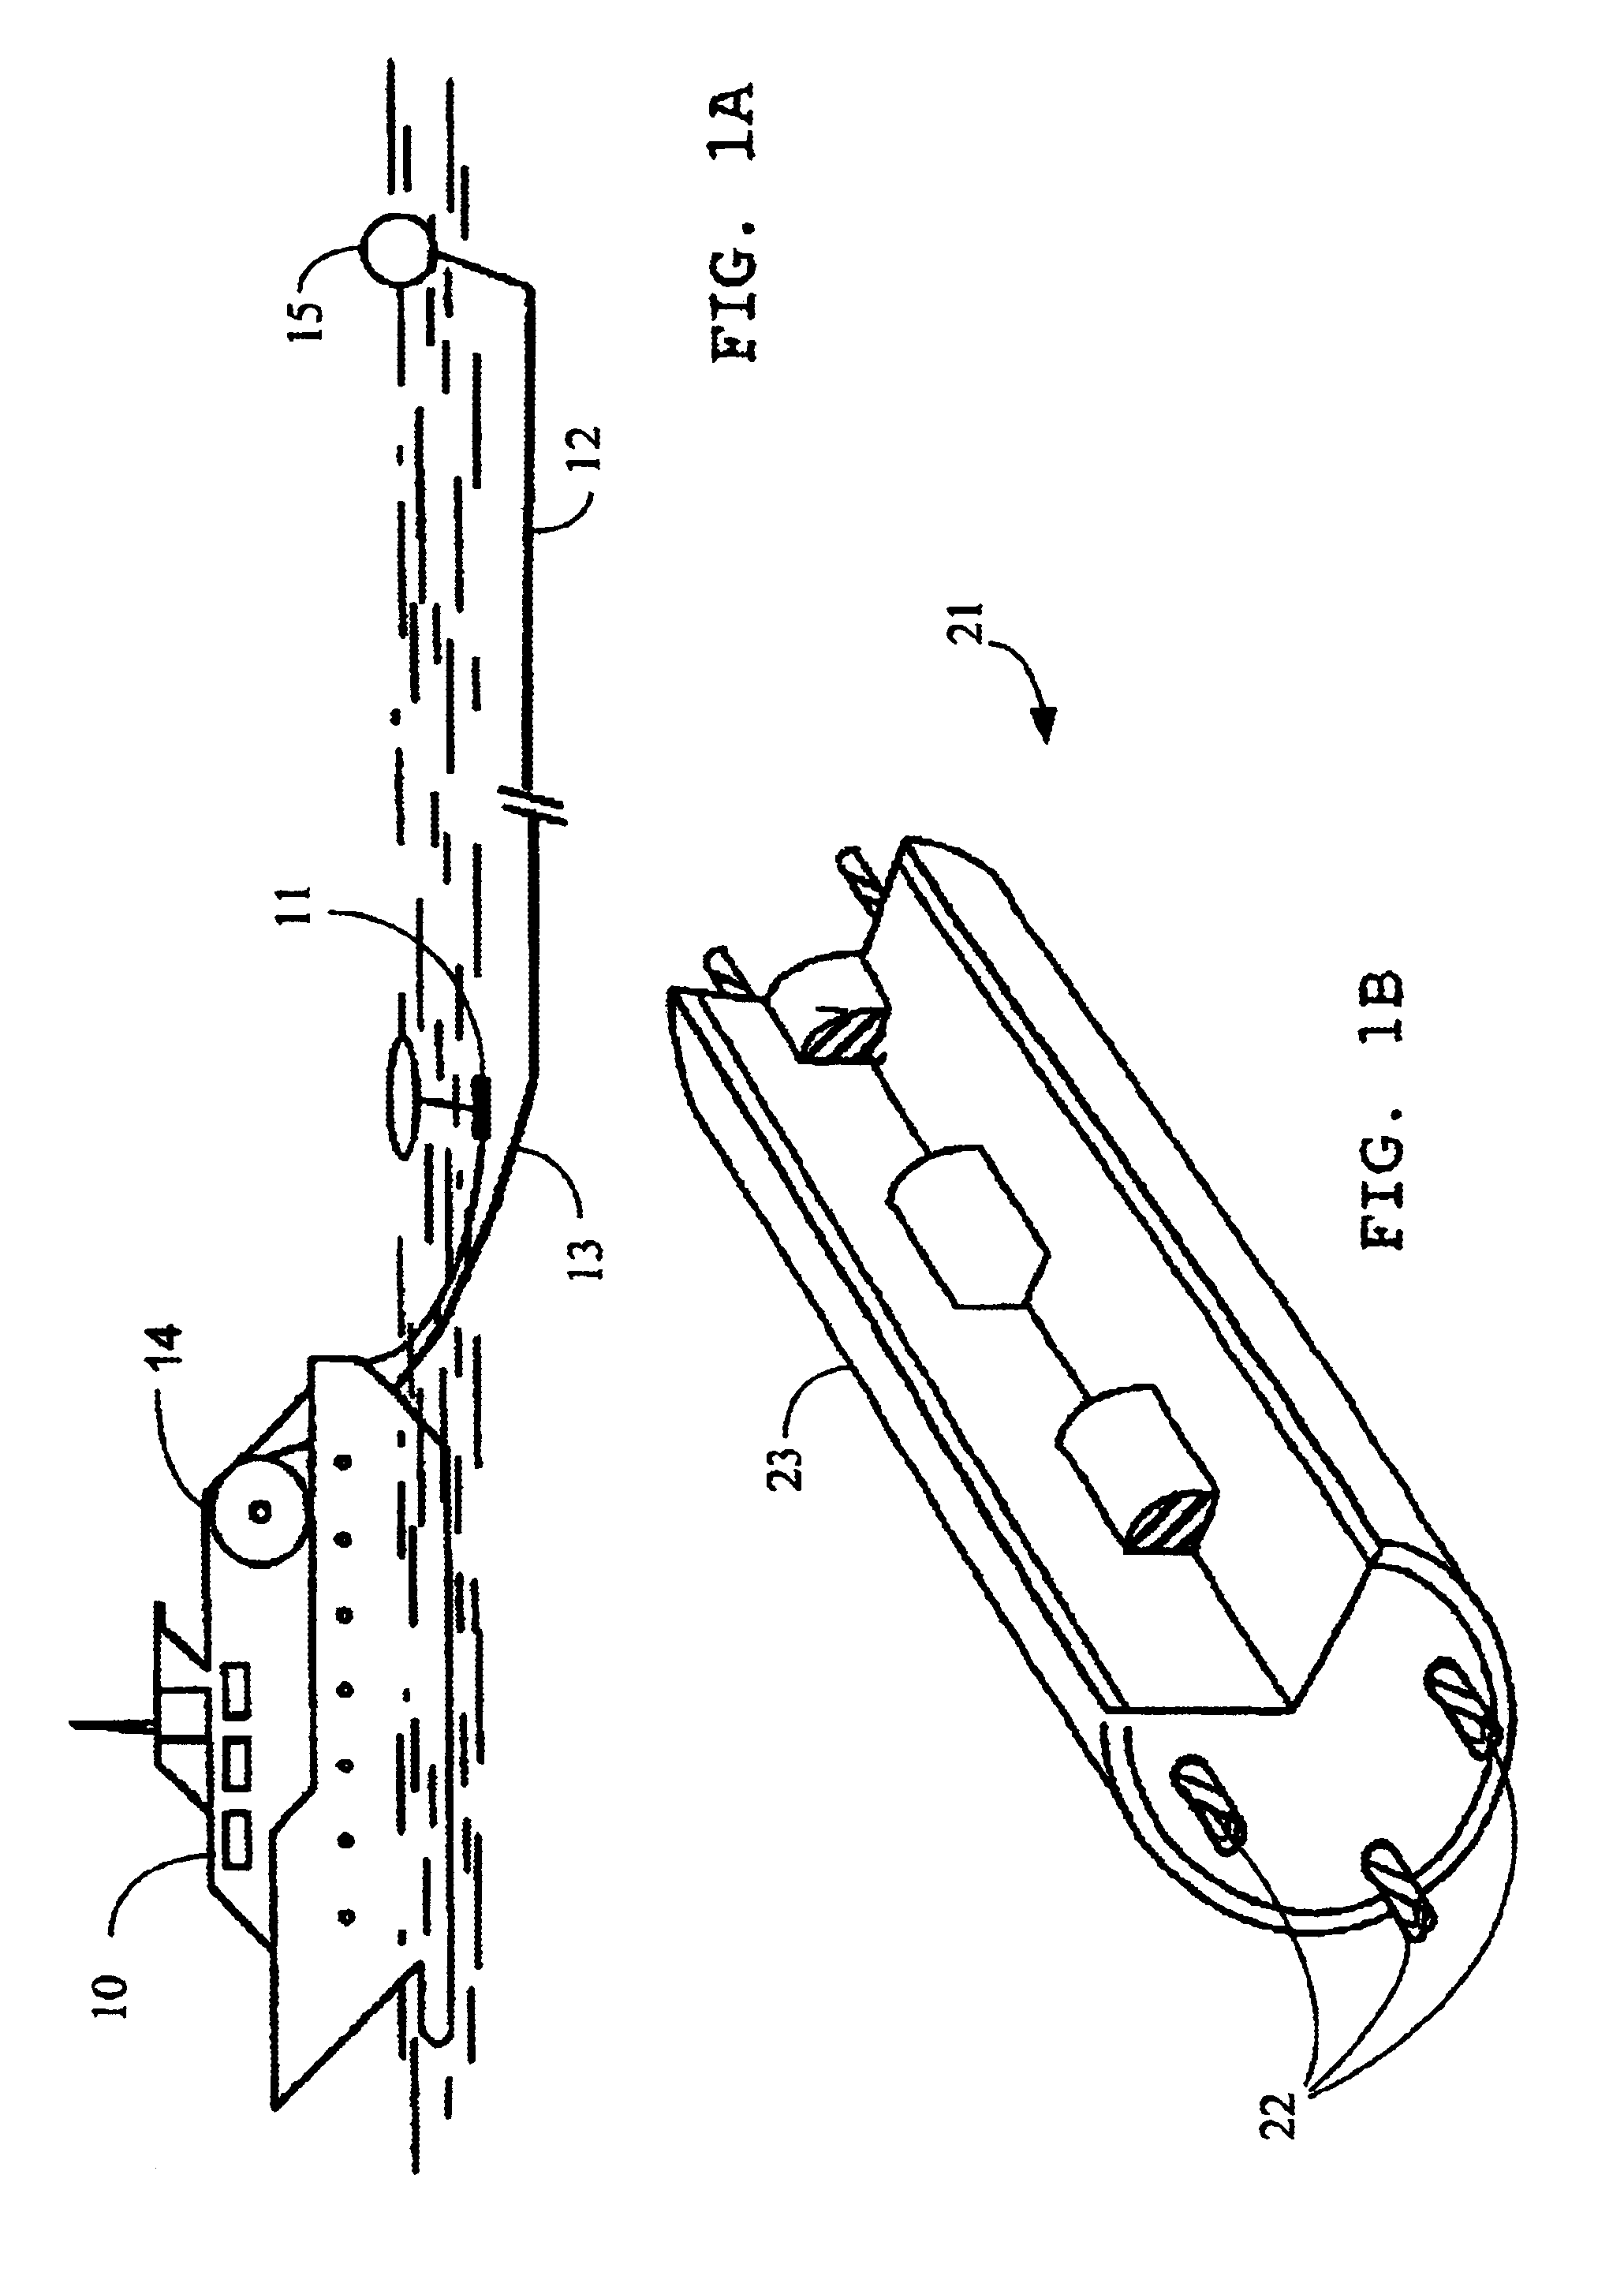 Marine seismic acquisition system and method